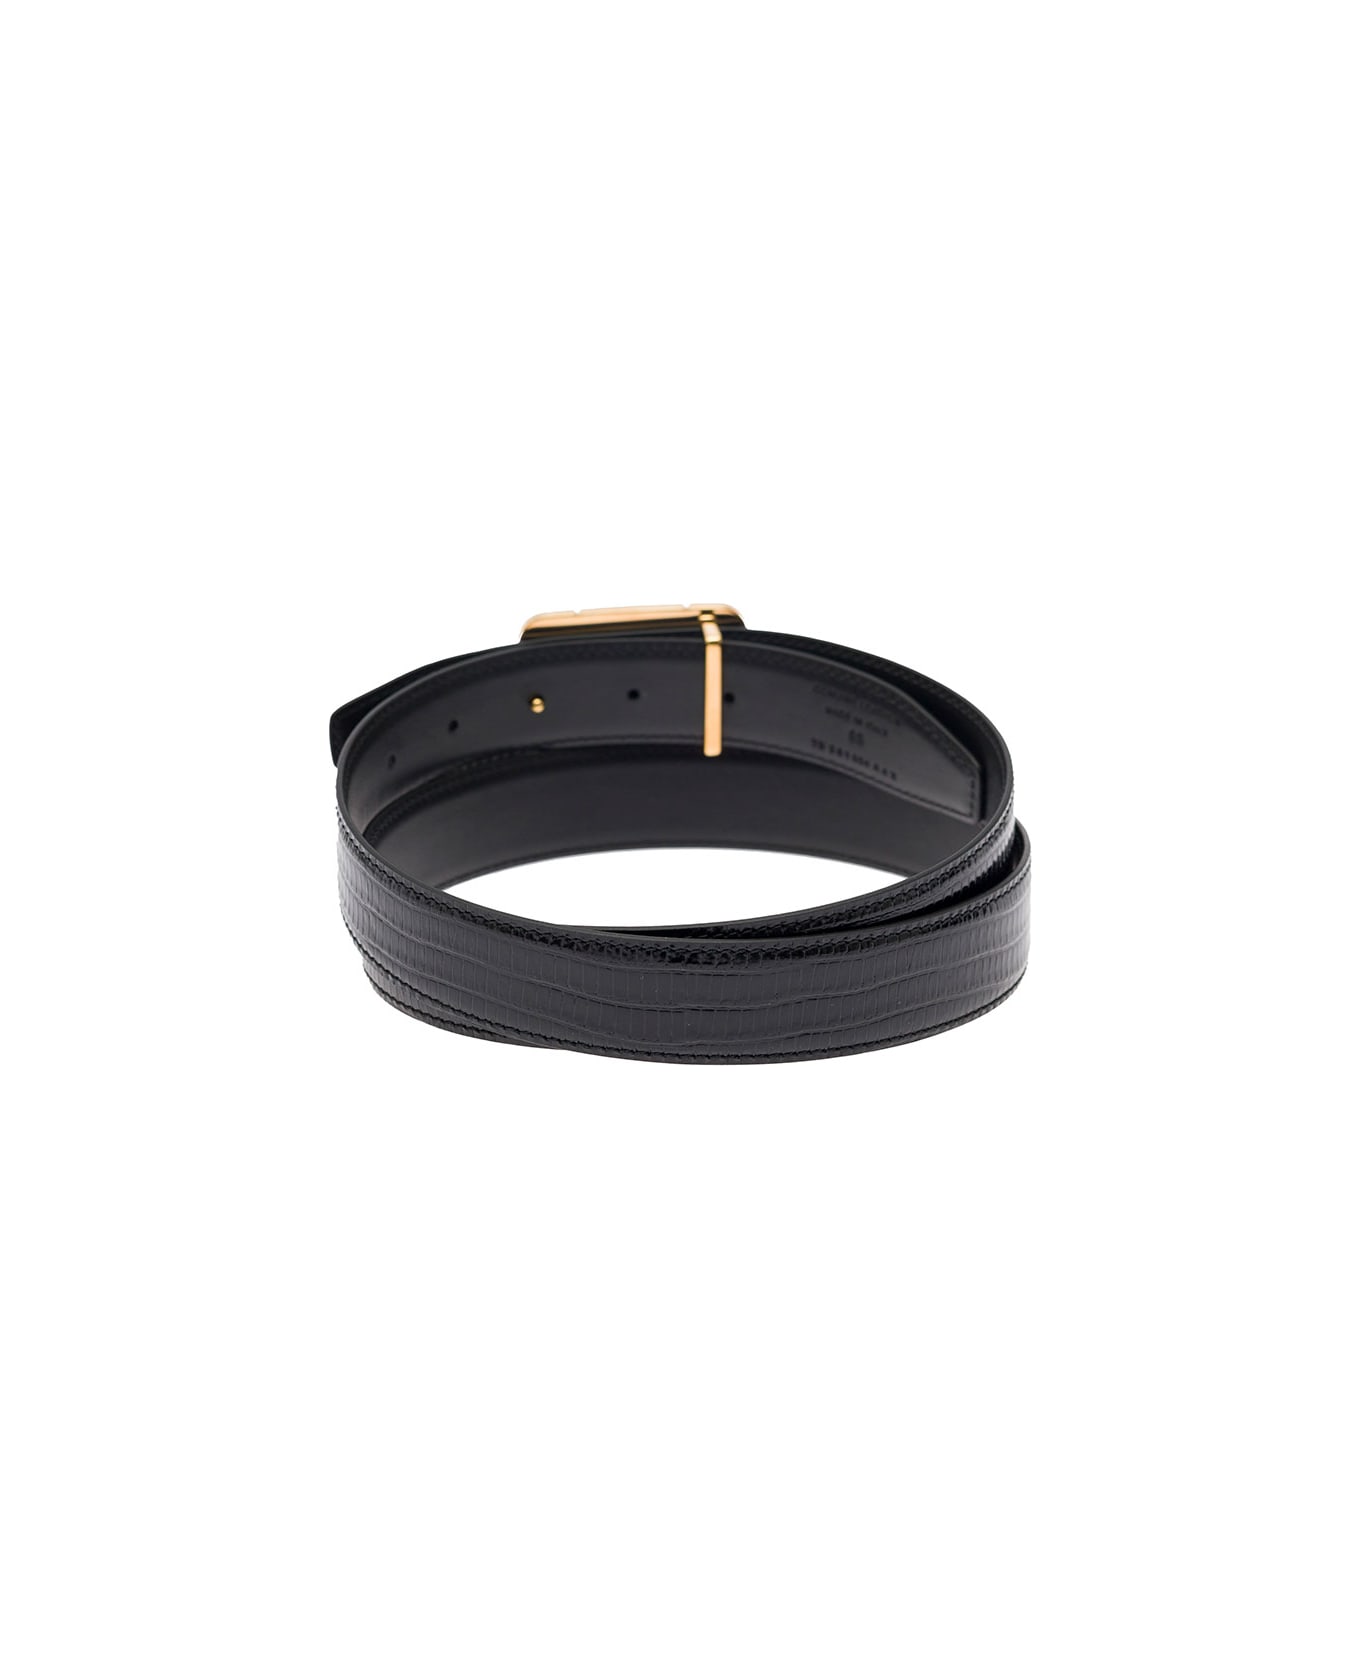 Tom Ford Black Belt With T Buckle In Smooth Leather Man - Black